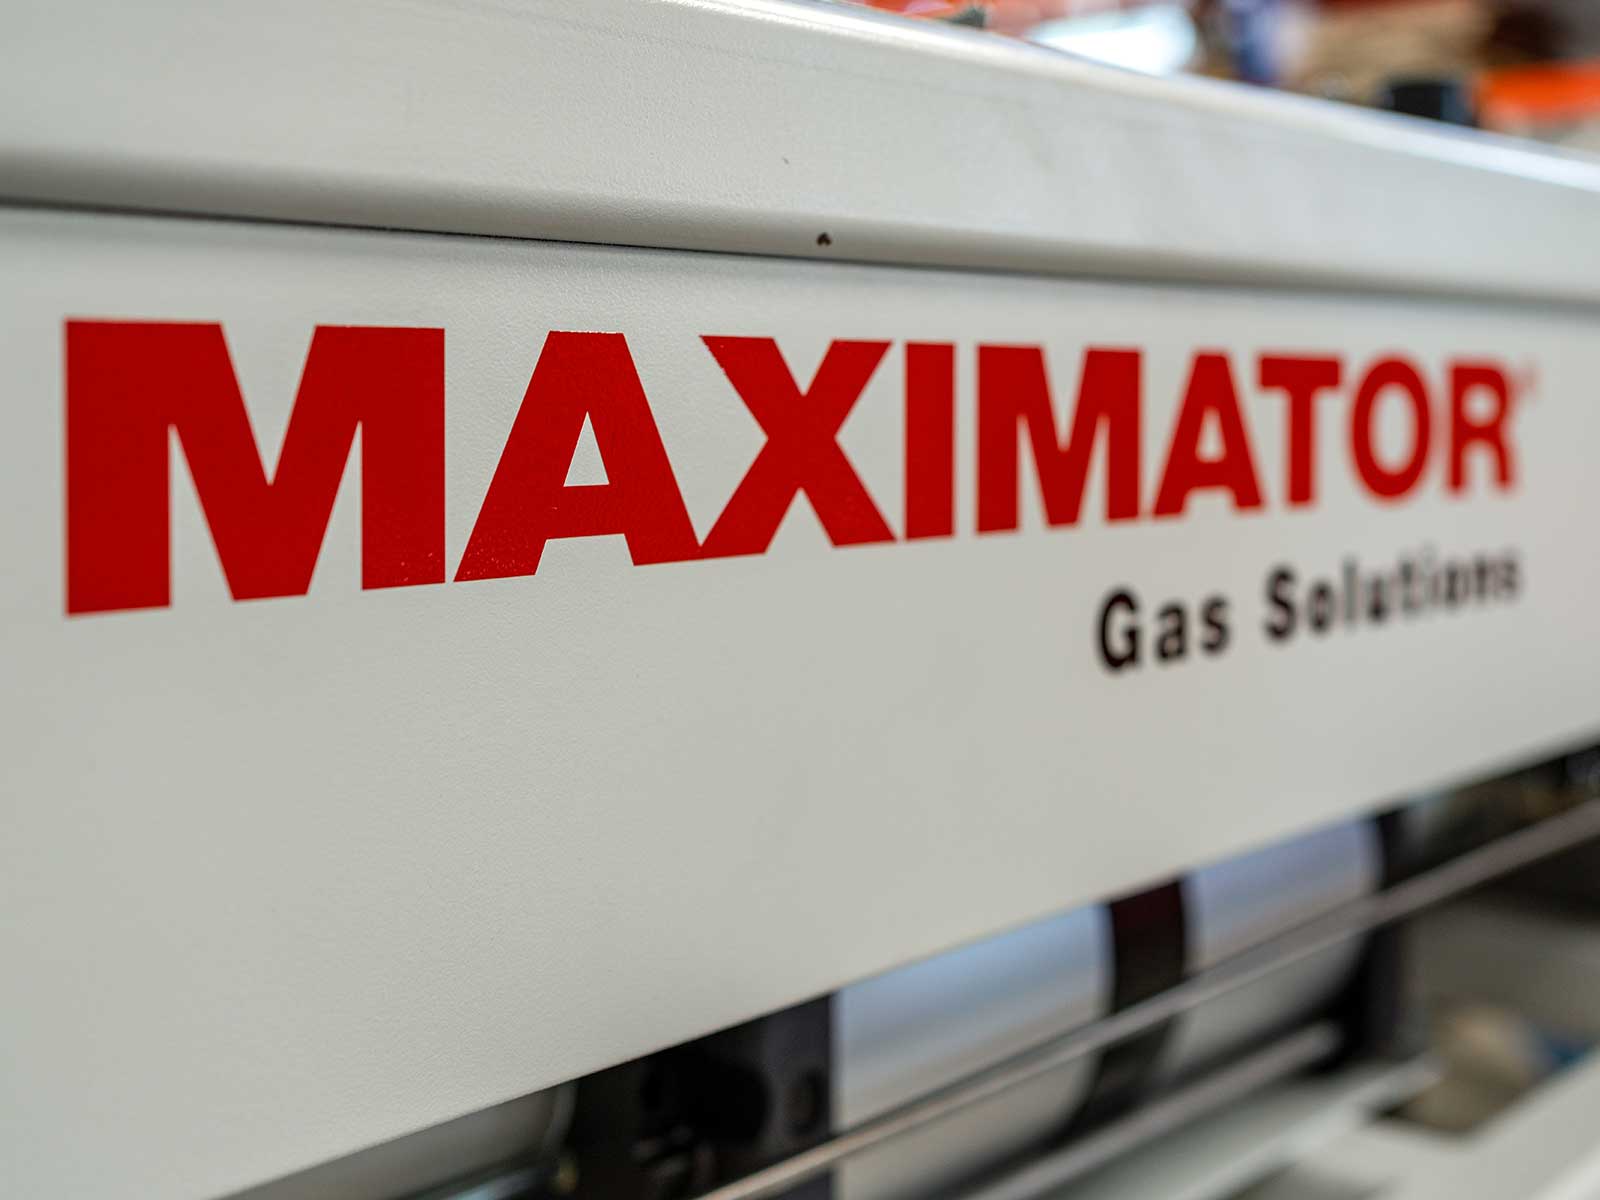 Maximator Gas Solutions GmbH is part of the Schmidt & Kranz Group.